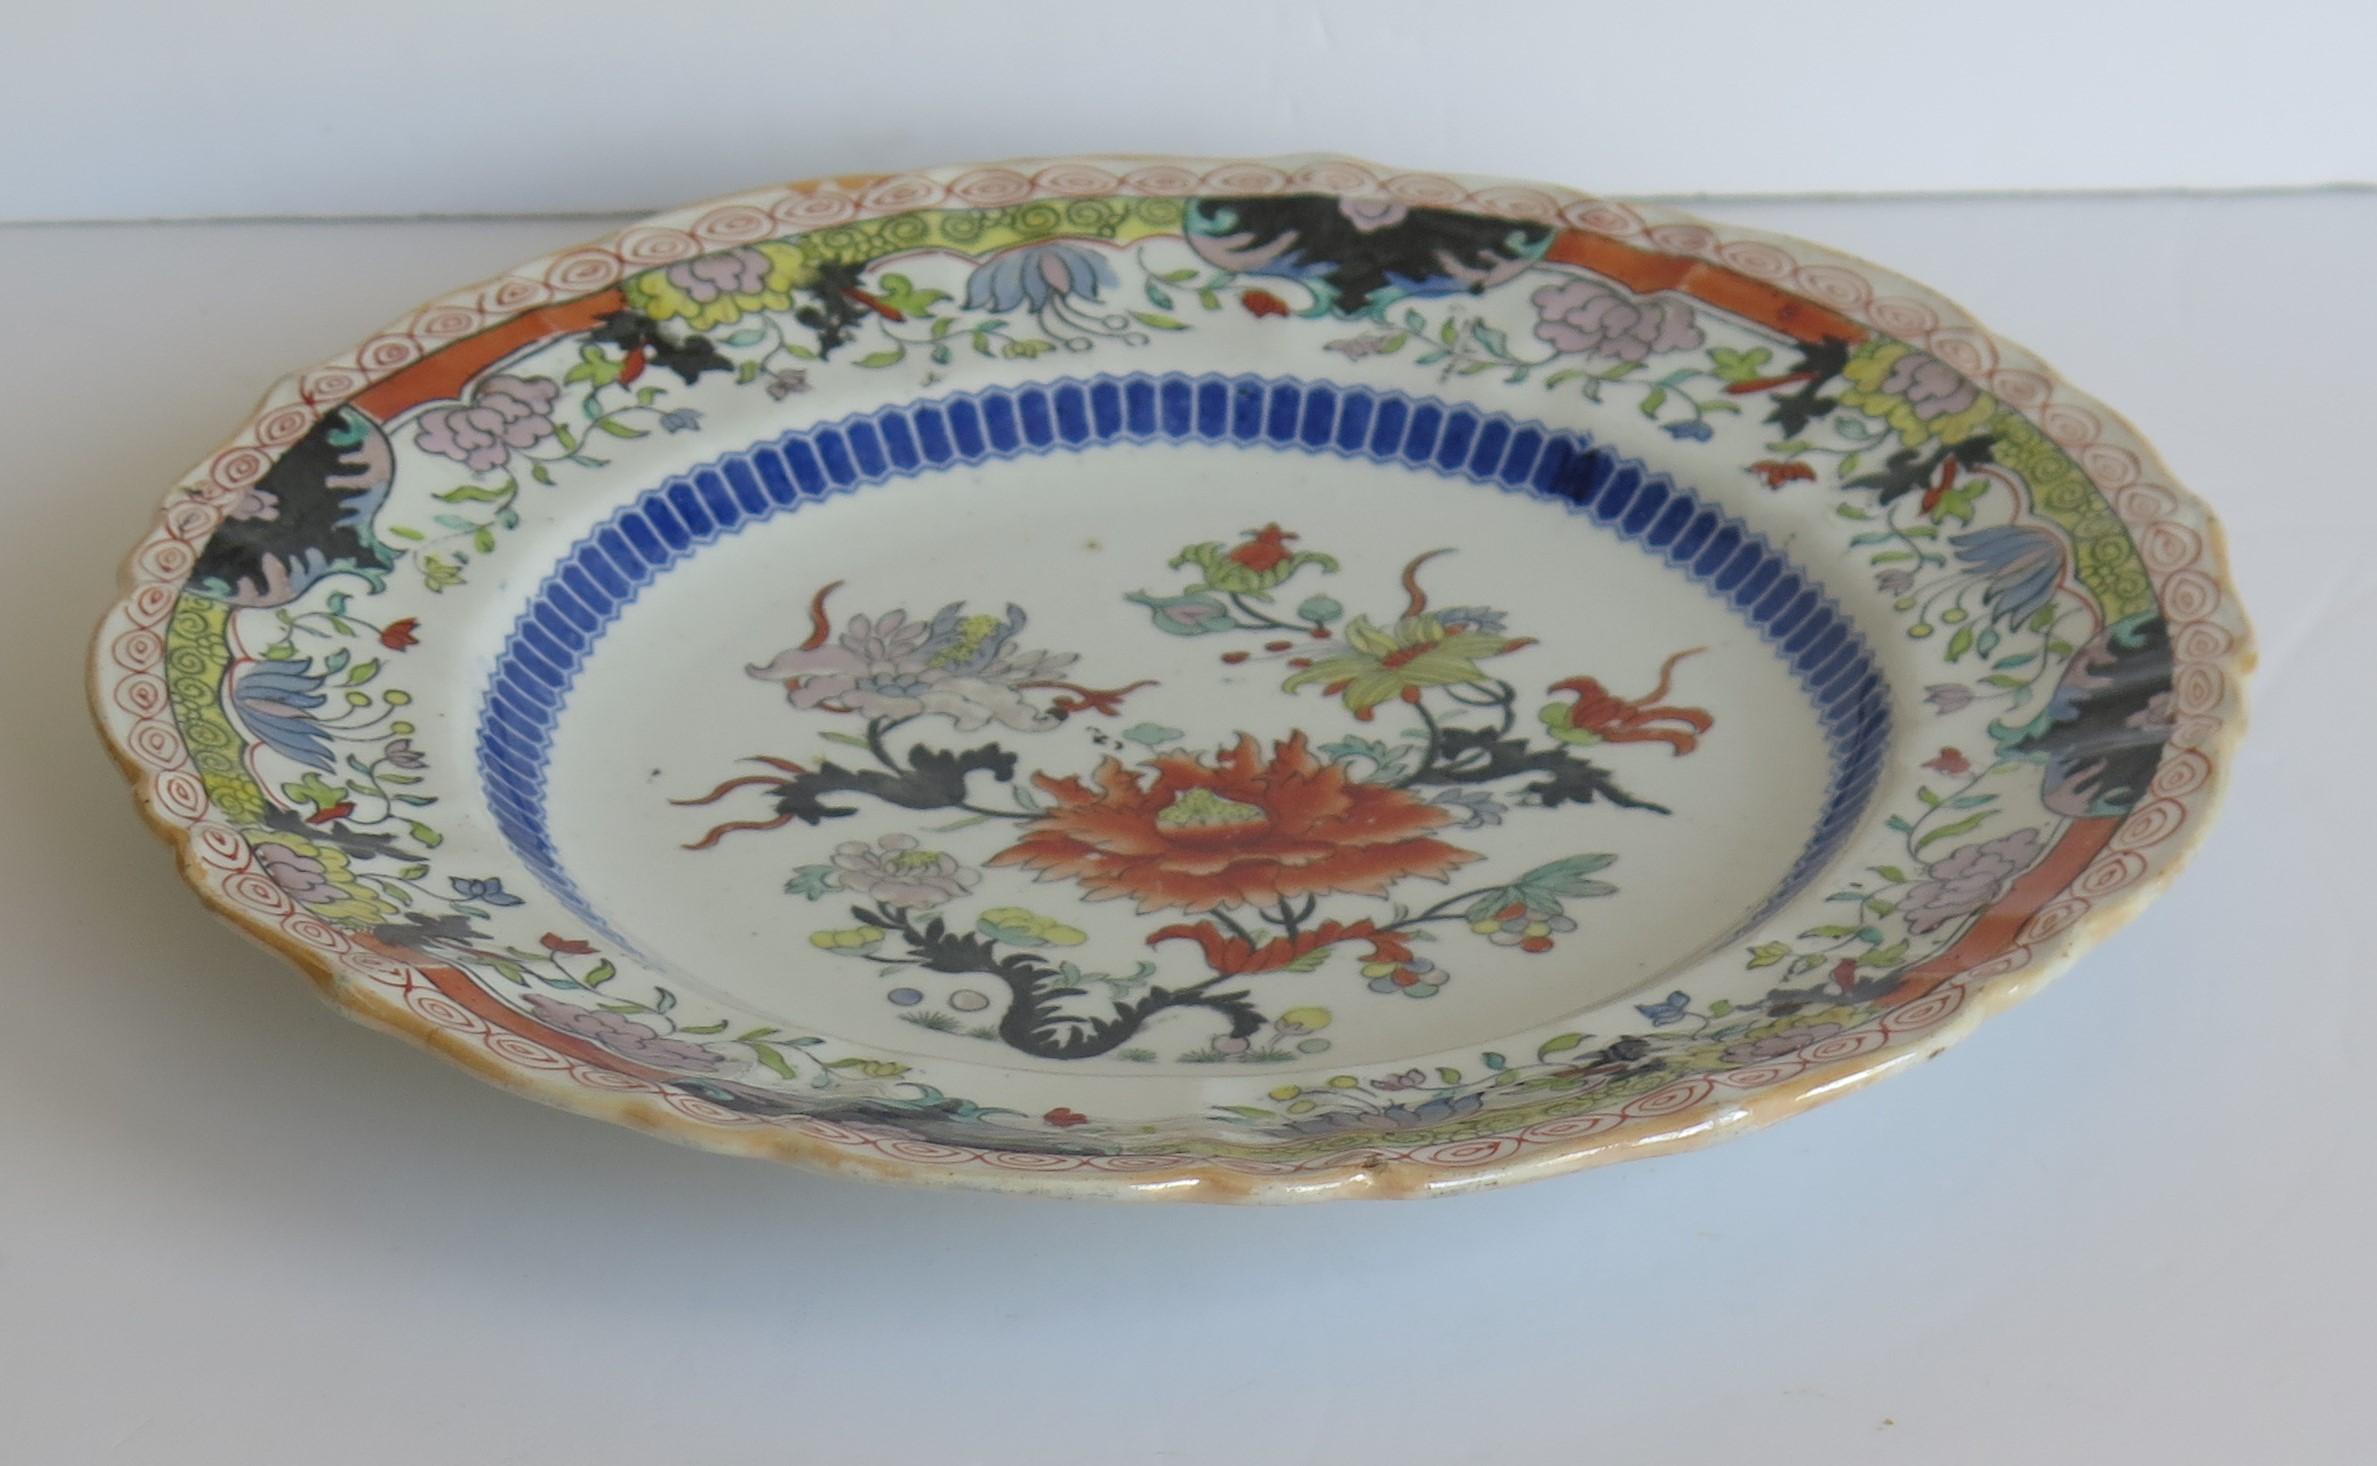 Chinoiserie Early 19th Century Masons Ironstone Plate in Ragged Rose Pattern, Circa 1830